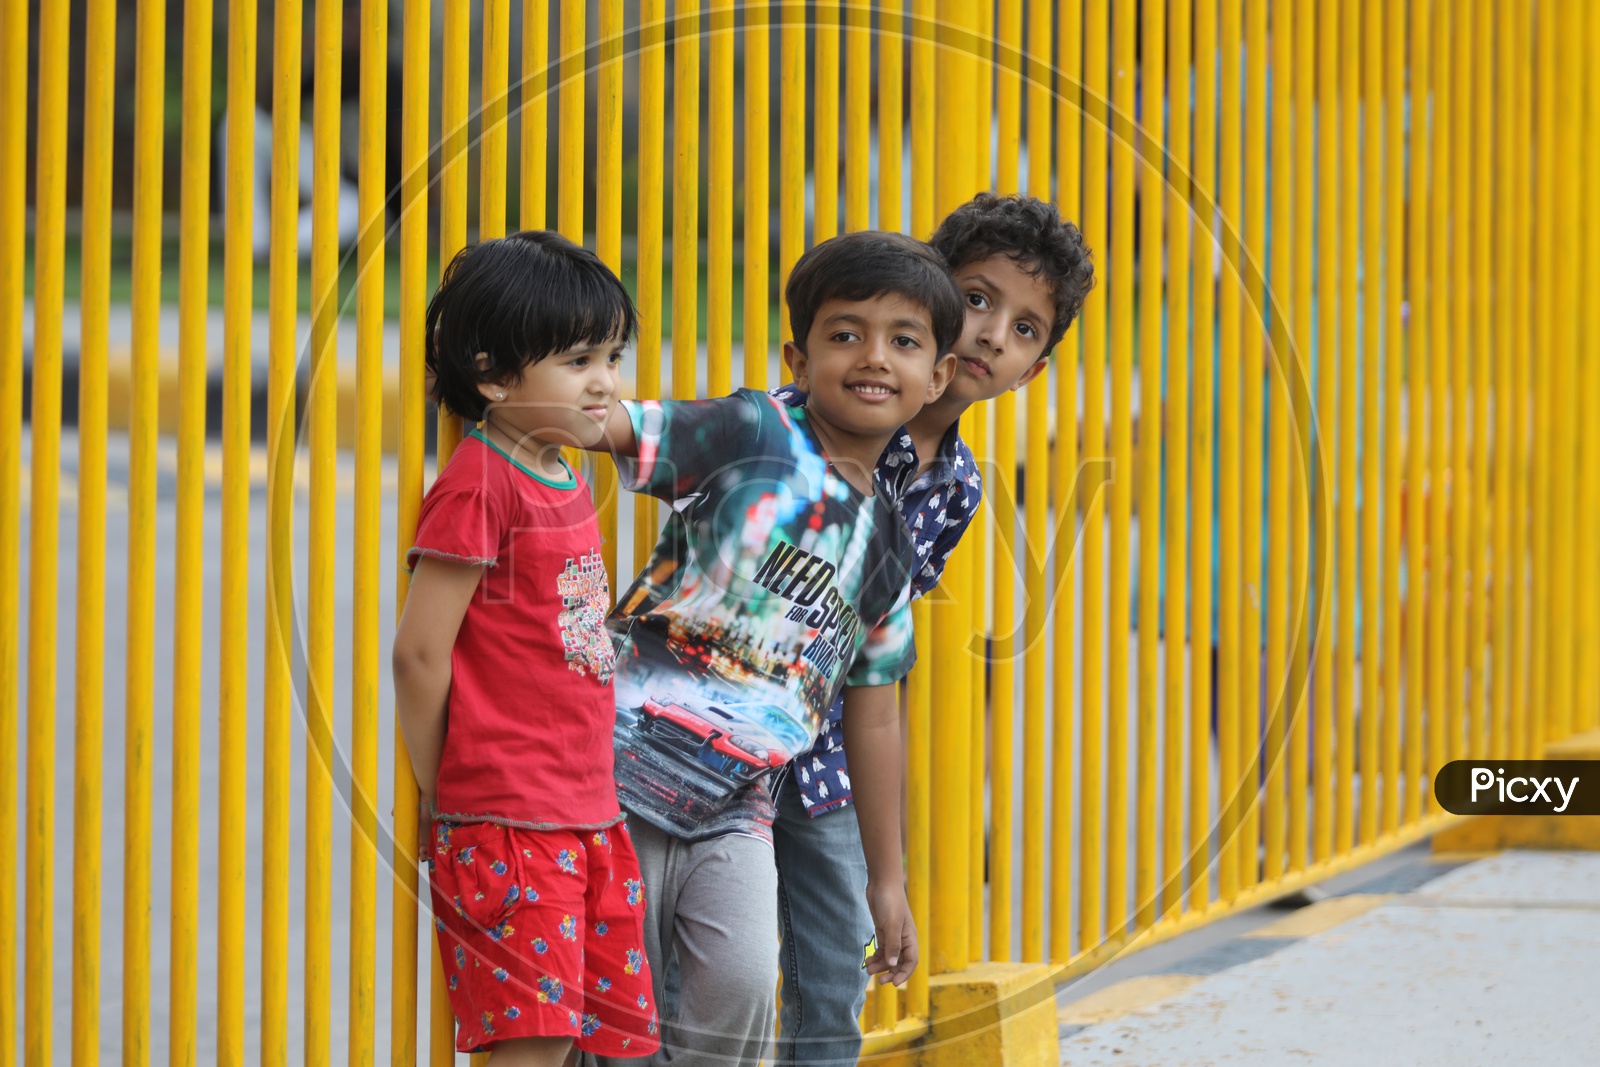 Indian Children Playing And Posing With Smile Face in a Park